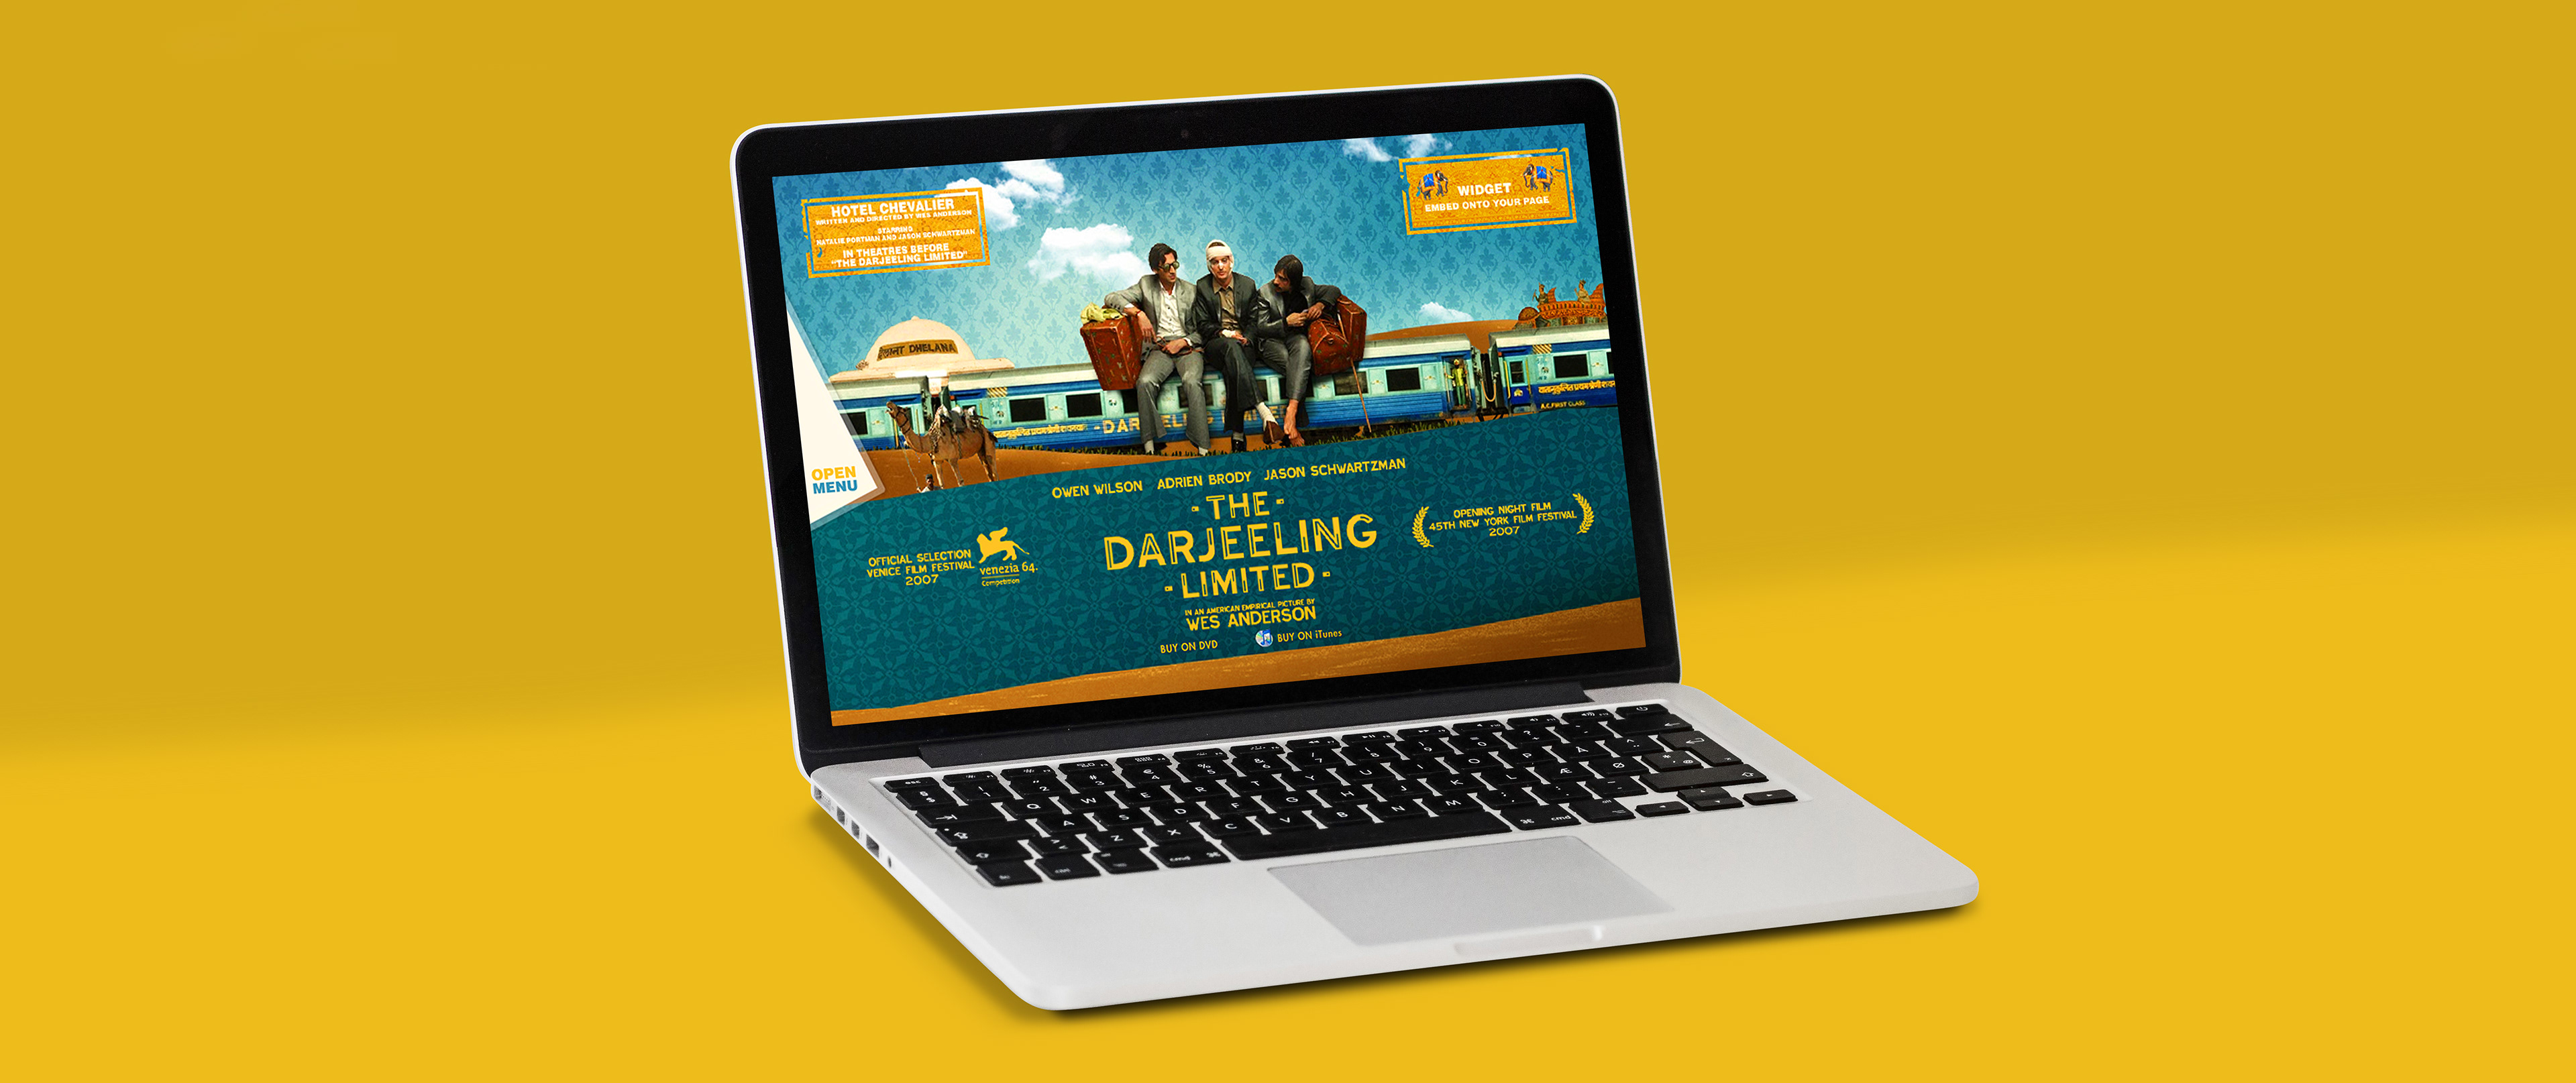 THE DARJEELING LIMITED Clips (2007) Wes Anderson 